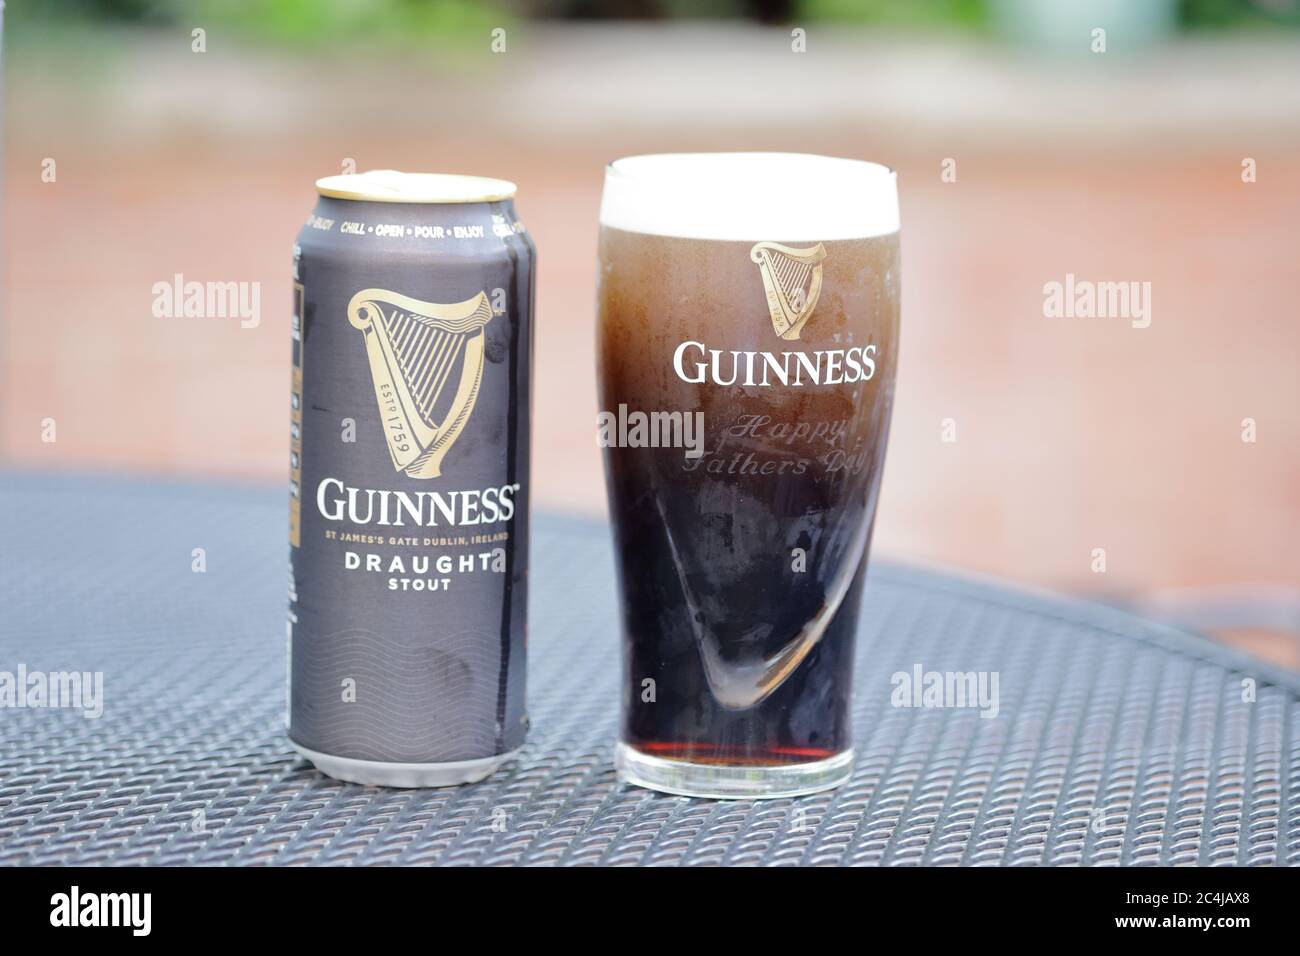 https://c8.alamy.com/comp/2C4JAX8/a-pbranded-glass-of-guinness-still-settling-and-can-outside-on-a-patio-table-2C4JAX8.jpg